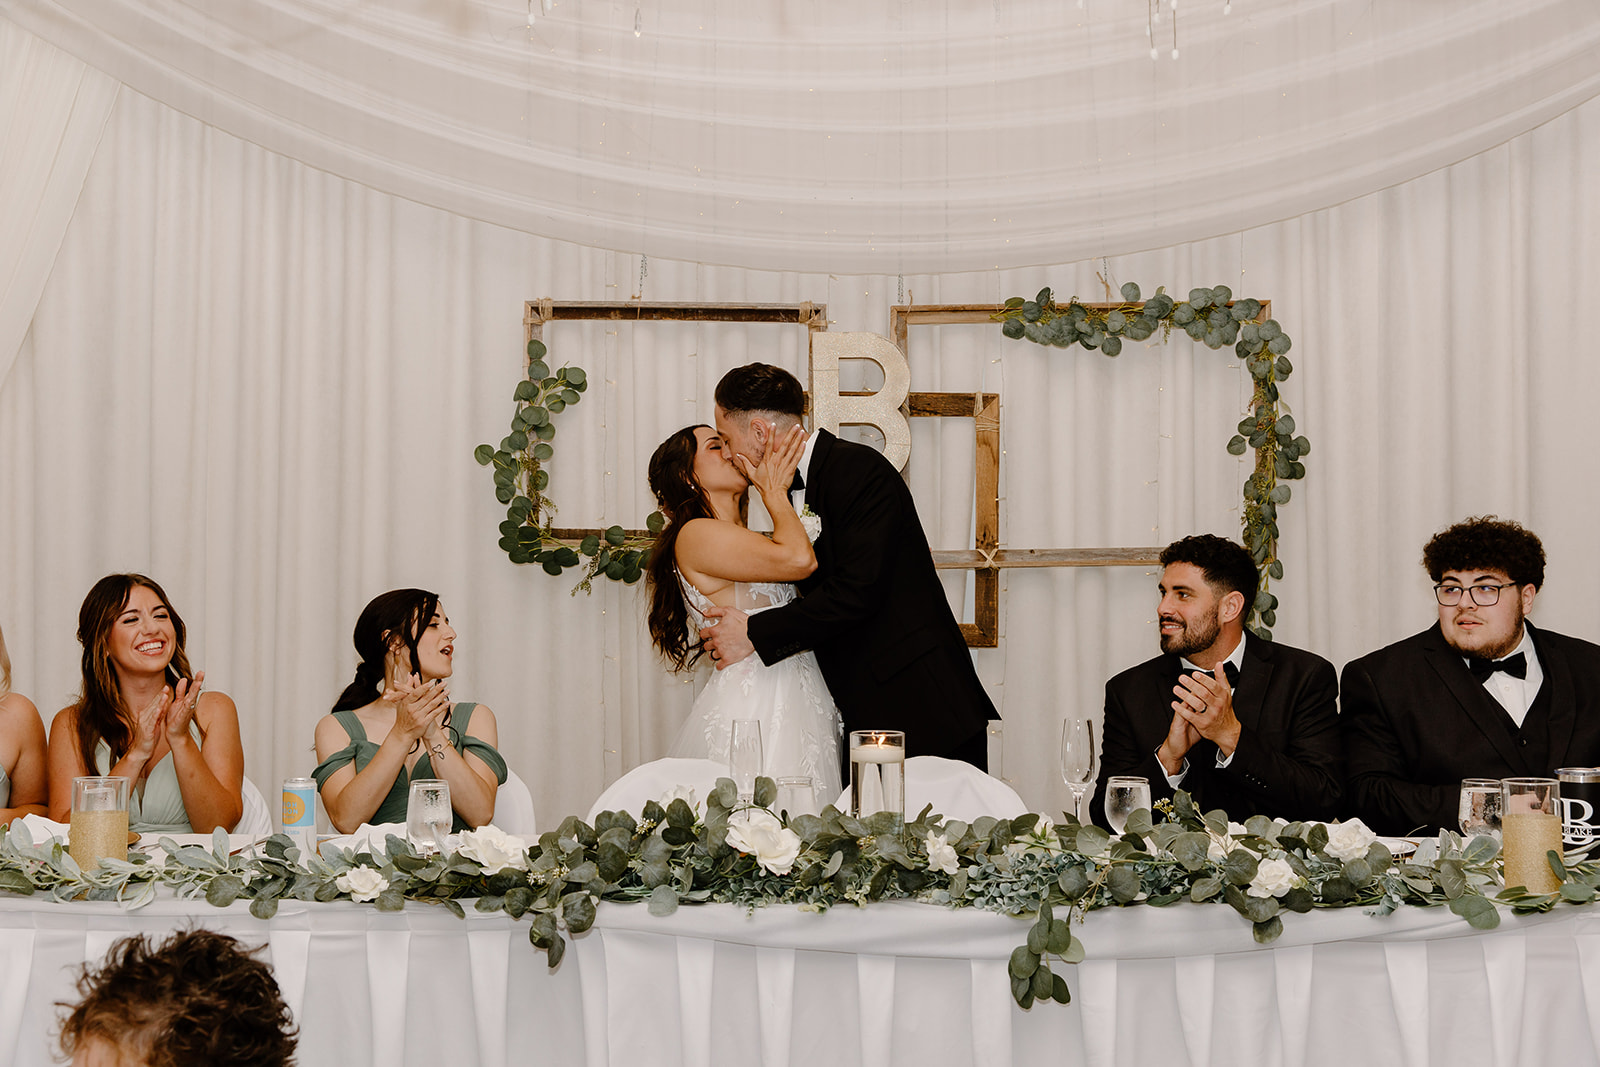 Bride and groom share a kiss at their wedding table